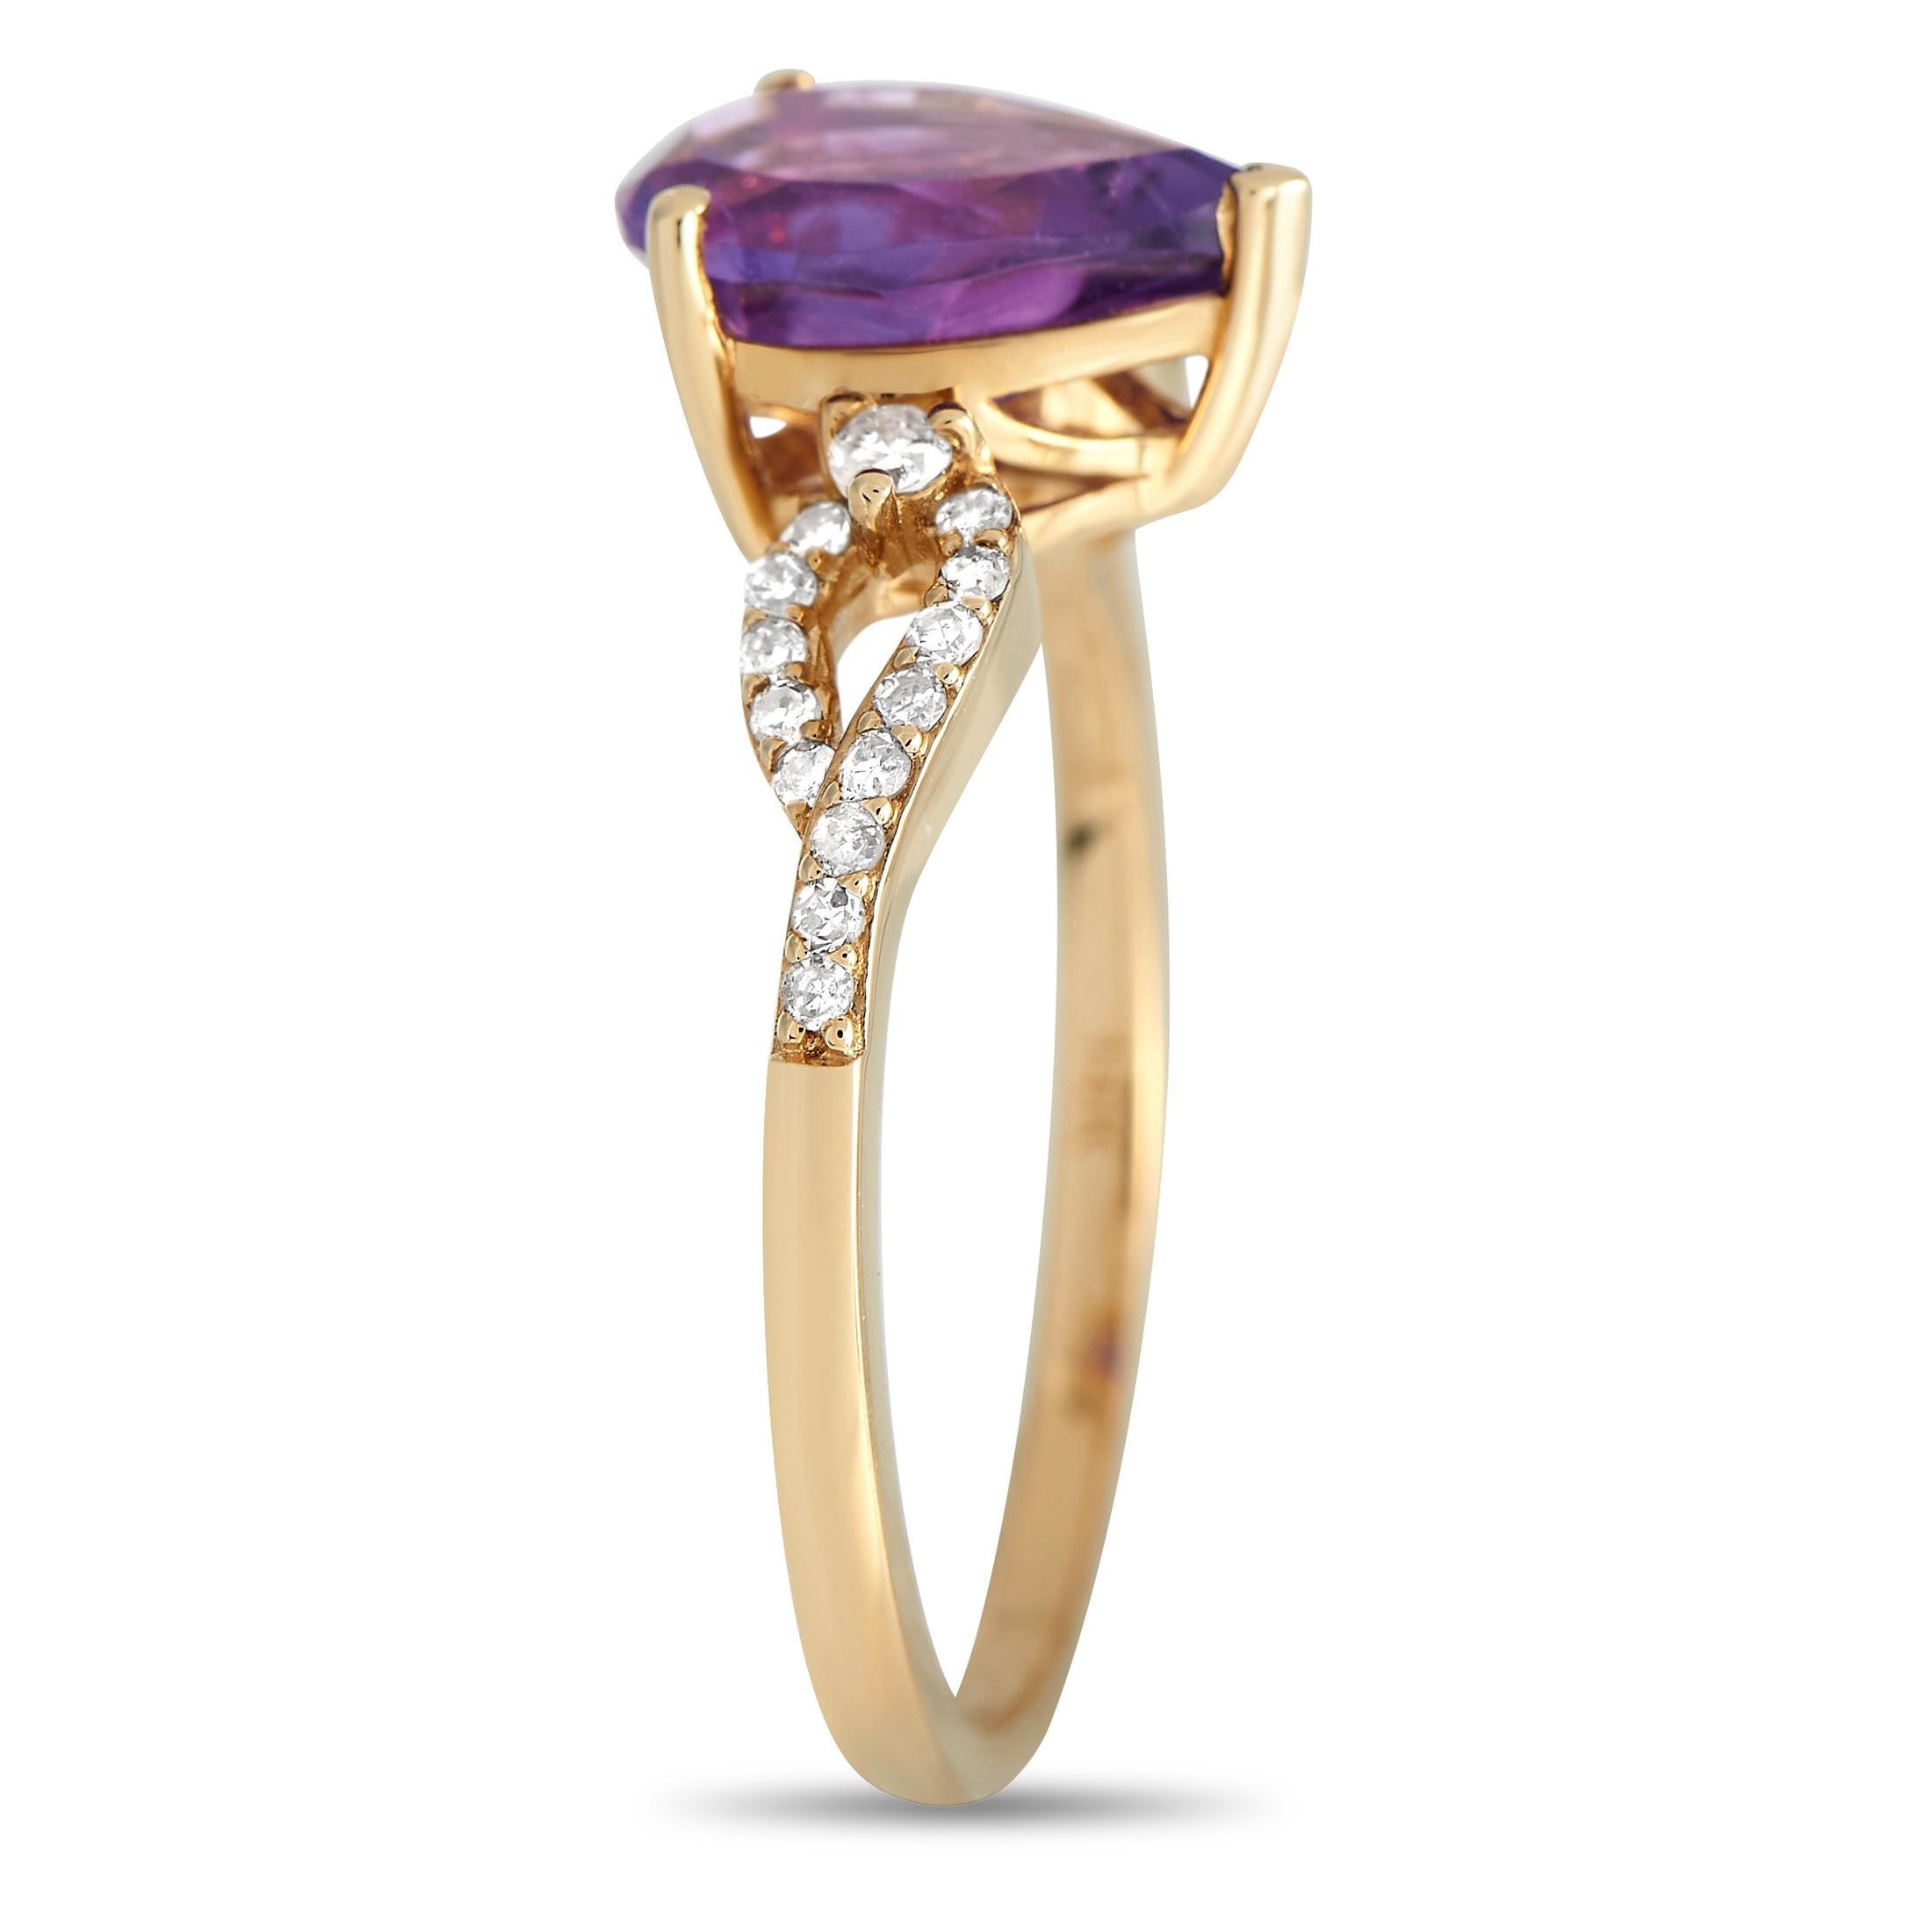 An opulent 14K Yellow Gold setting beautifully highlights a stunning Amethyst center stone and Diamond accents totaling 0.15 carats on this exquisite ring. Simple and stylish, this piece features a 2mm wide band and a top height measuring 6mm.This